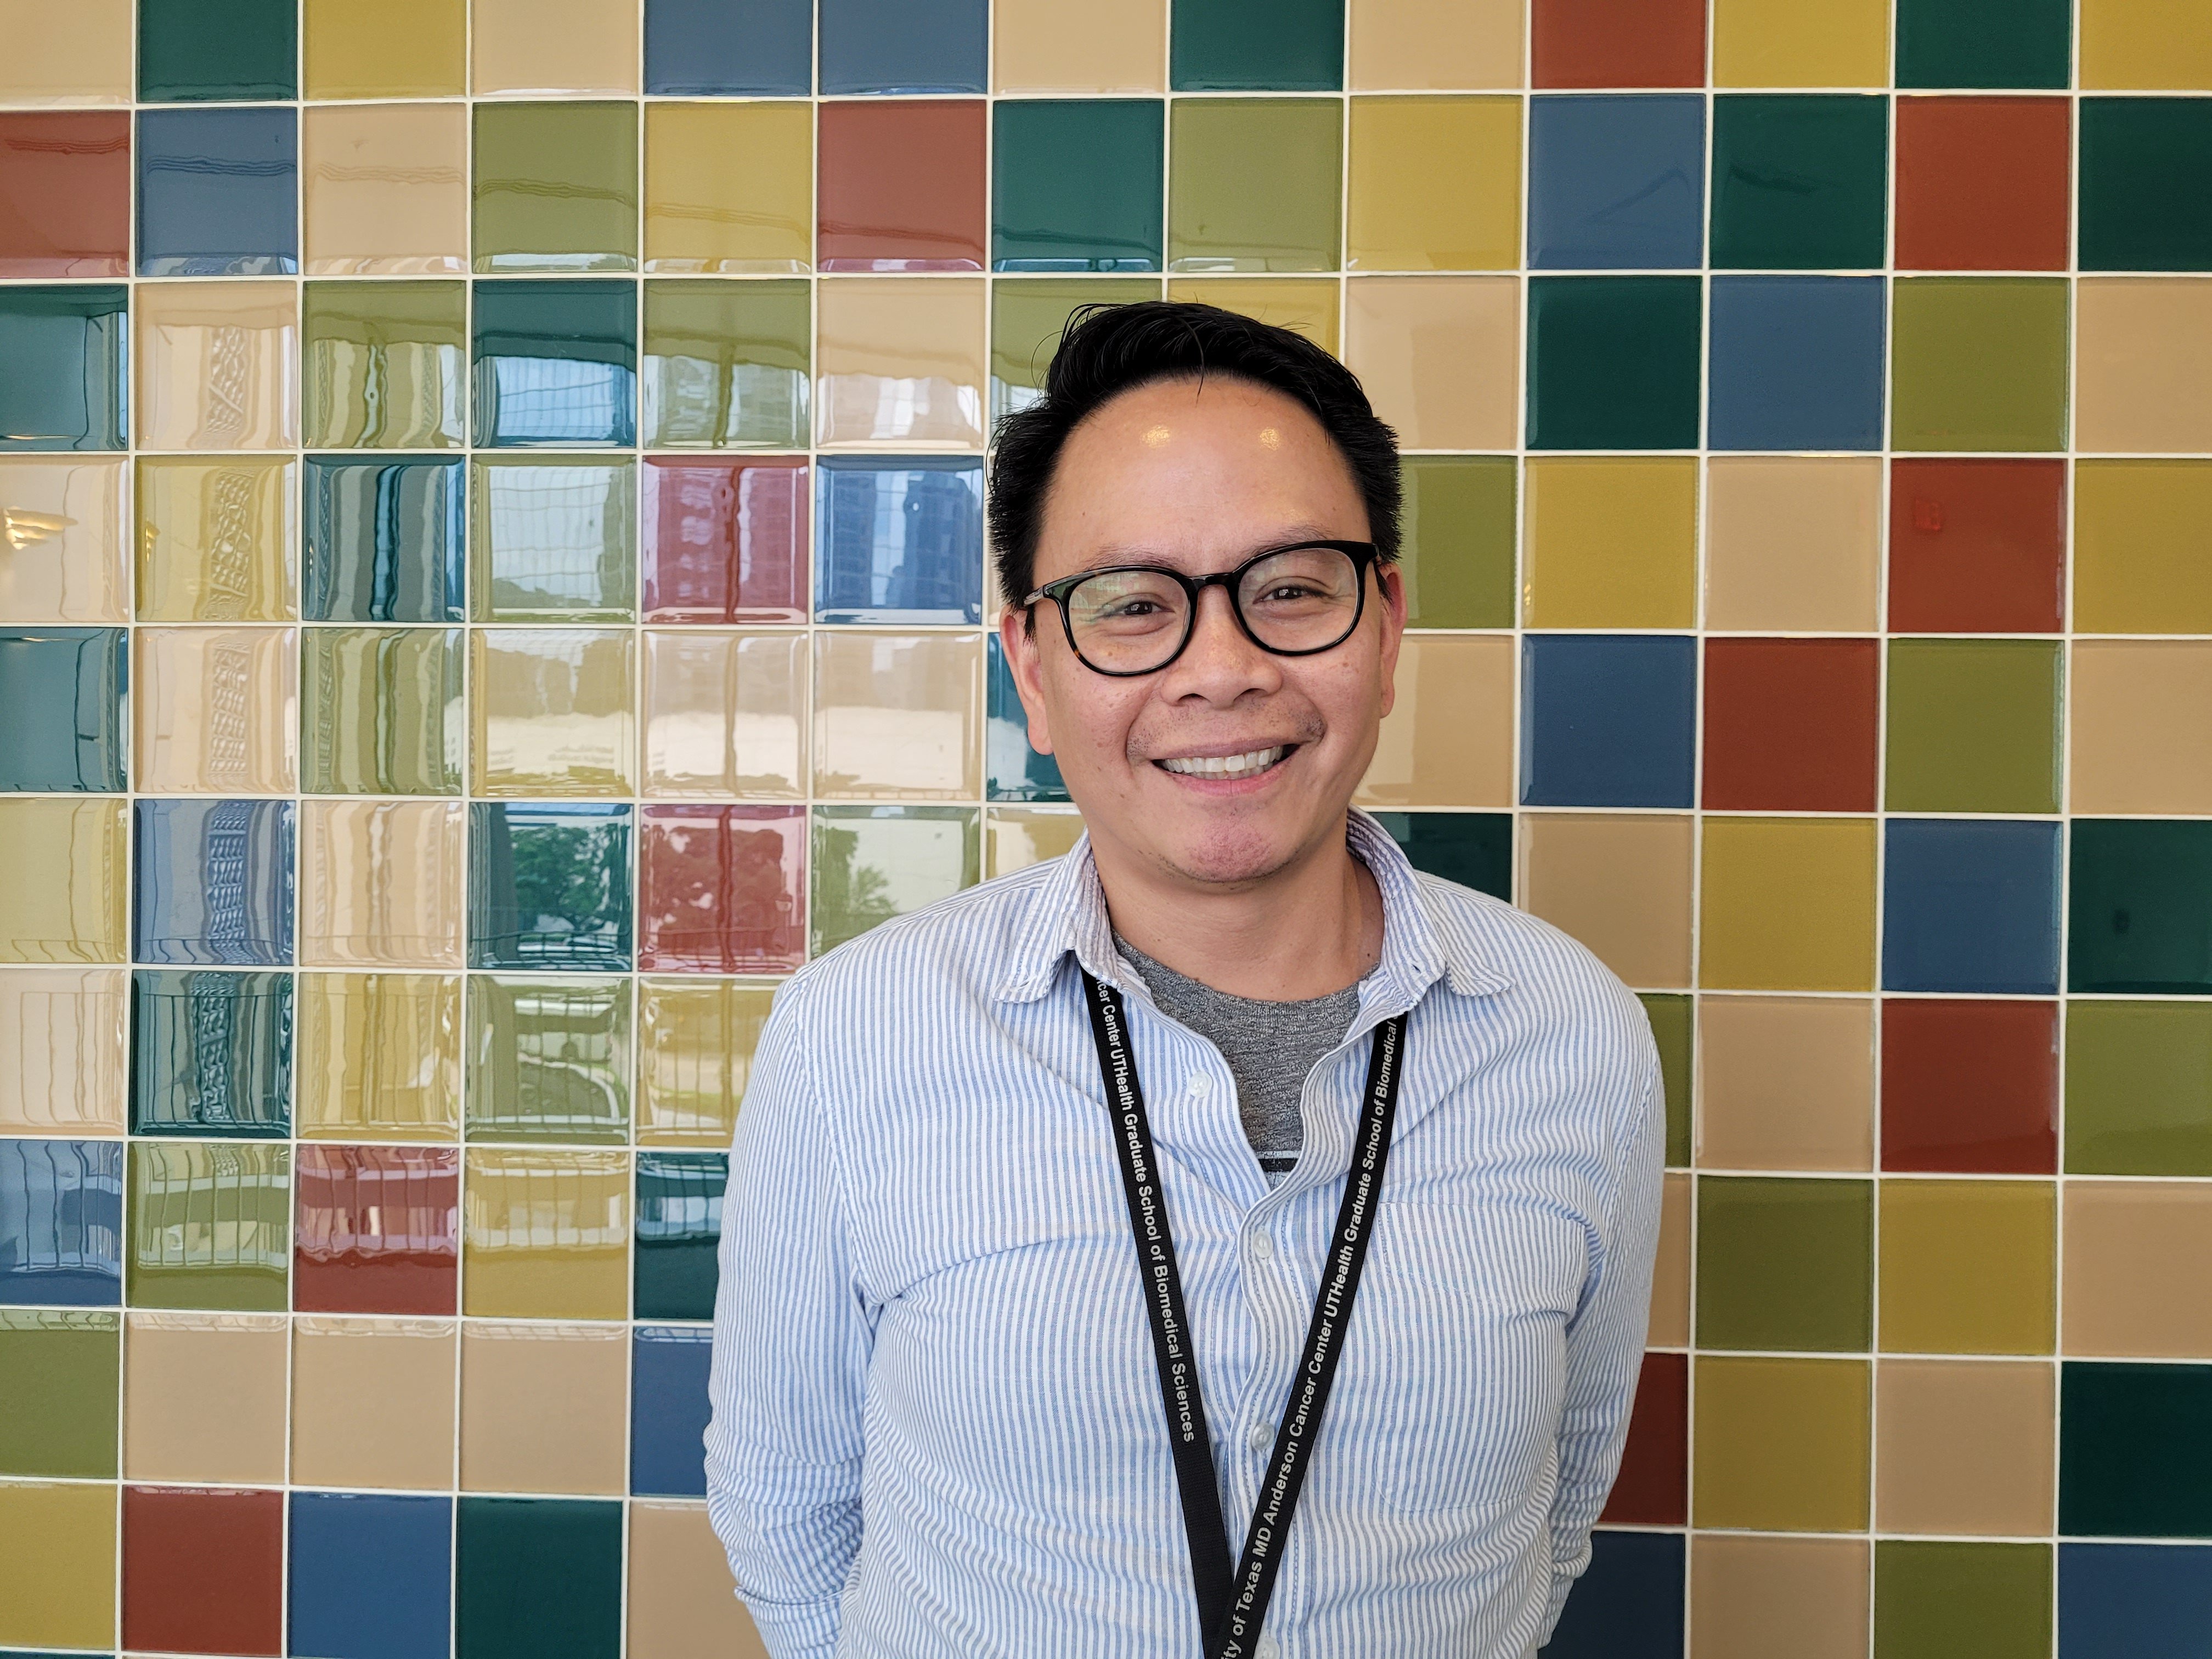 Photo of a man with black hair and glasses smiling in front of a multicolored tile wall